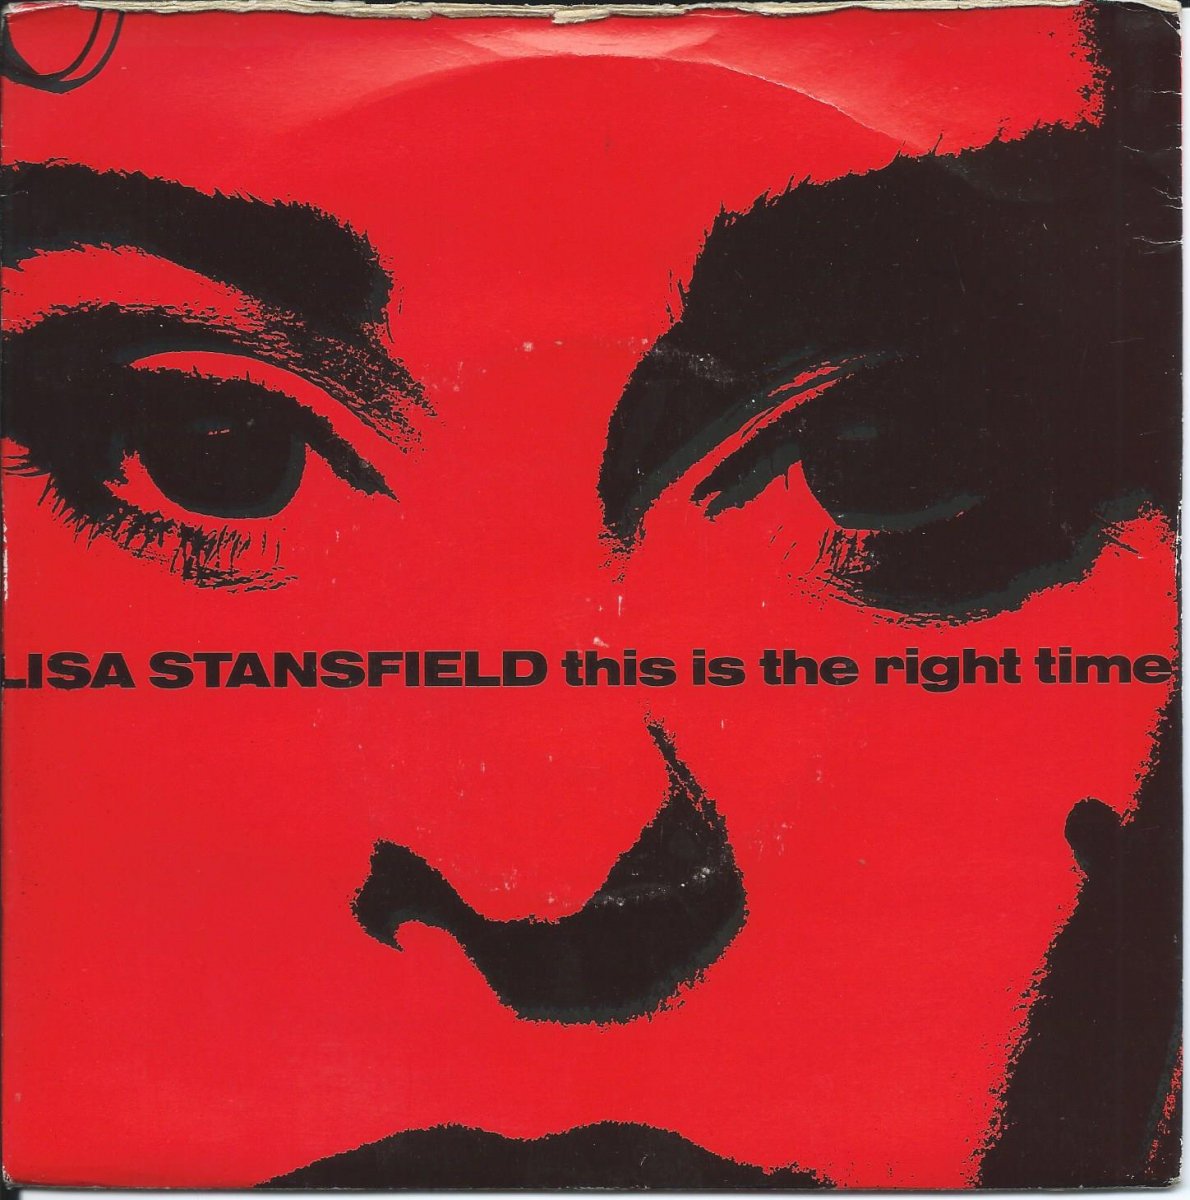 LISA STANSFIELD / THIS IS THE RIGHT TIME / AFFECTION (7